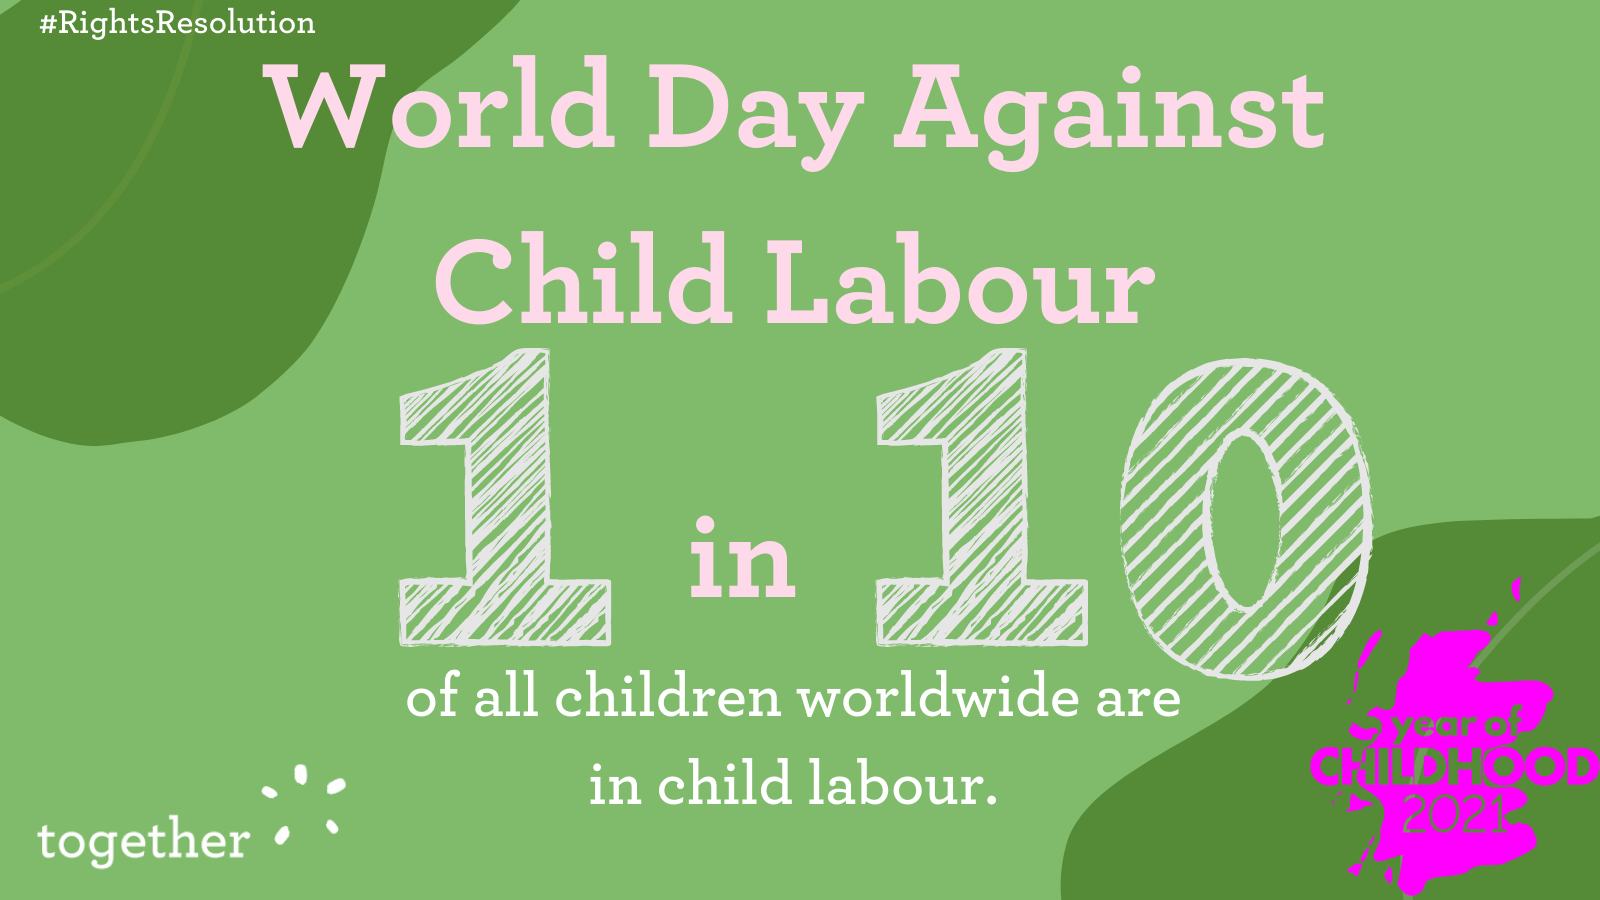 1 in 10 of all children worldwide are in child labour